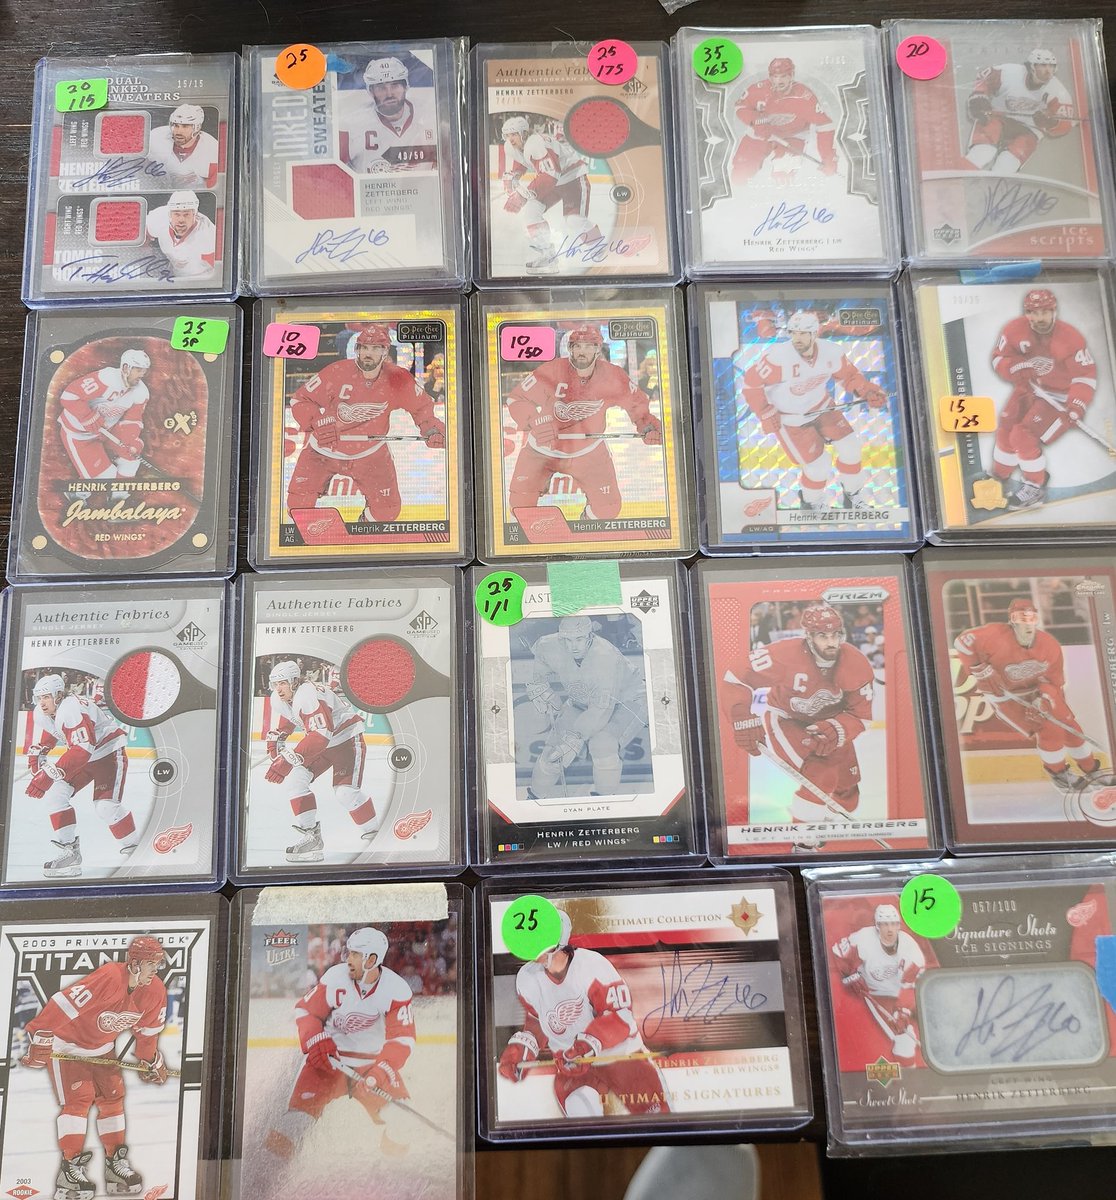 Holmstrom patch auto game used letter lot 100$ shipped.

Bowman 1/1 40 shipped
Draper cup retro 40$
Murphy 1/1s 20 each
Lashoff rc 1/1 auto 25$
Zetterberg rc auto /1000 25$
Quad patches /4 20$
andreas athanasiou rc patch /10 30$

Zetterberg lot 250$